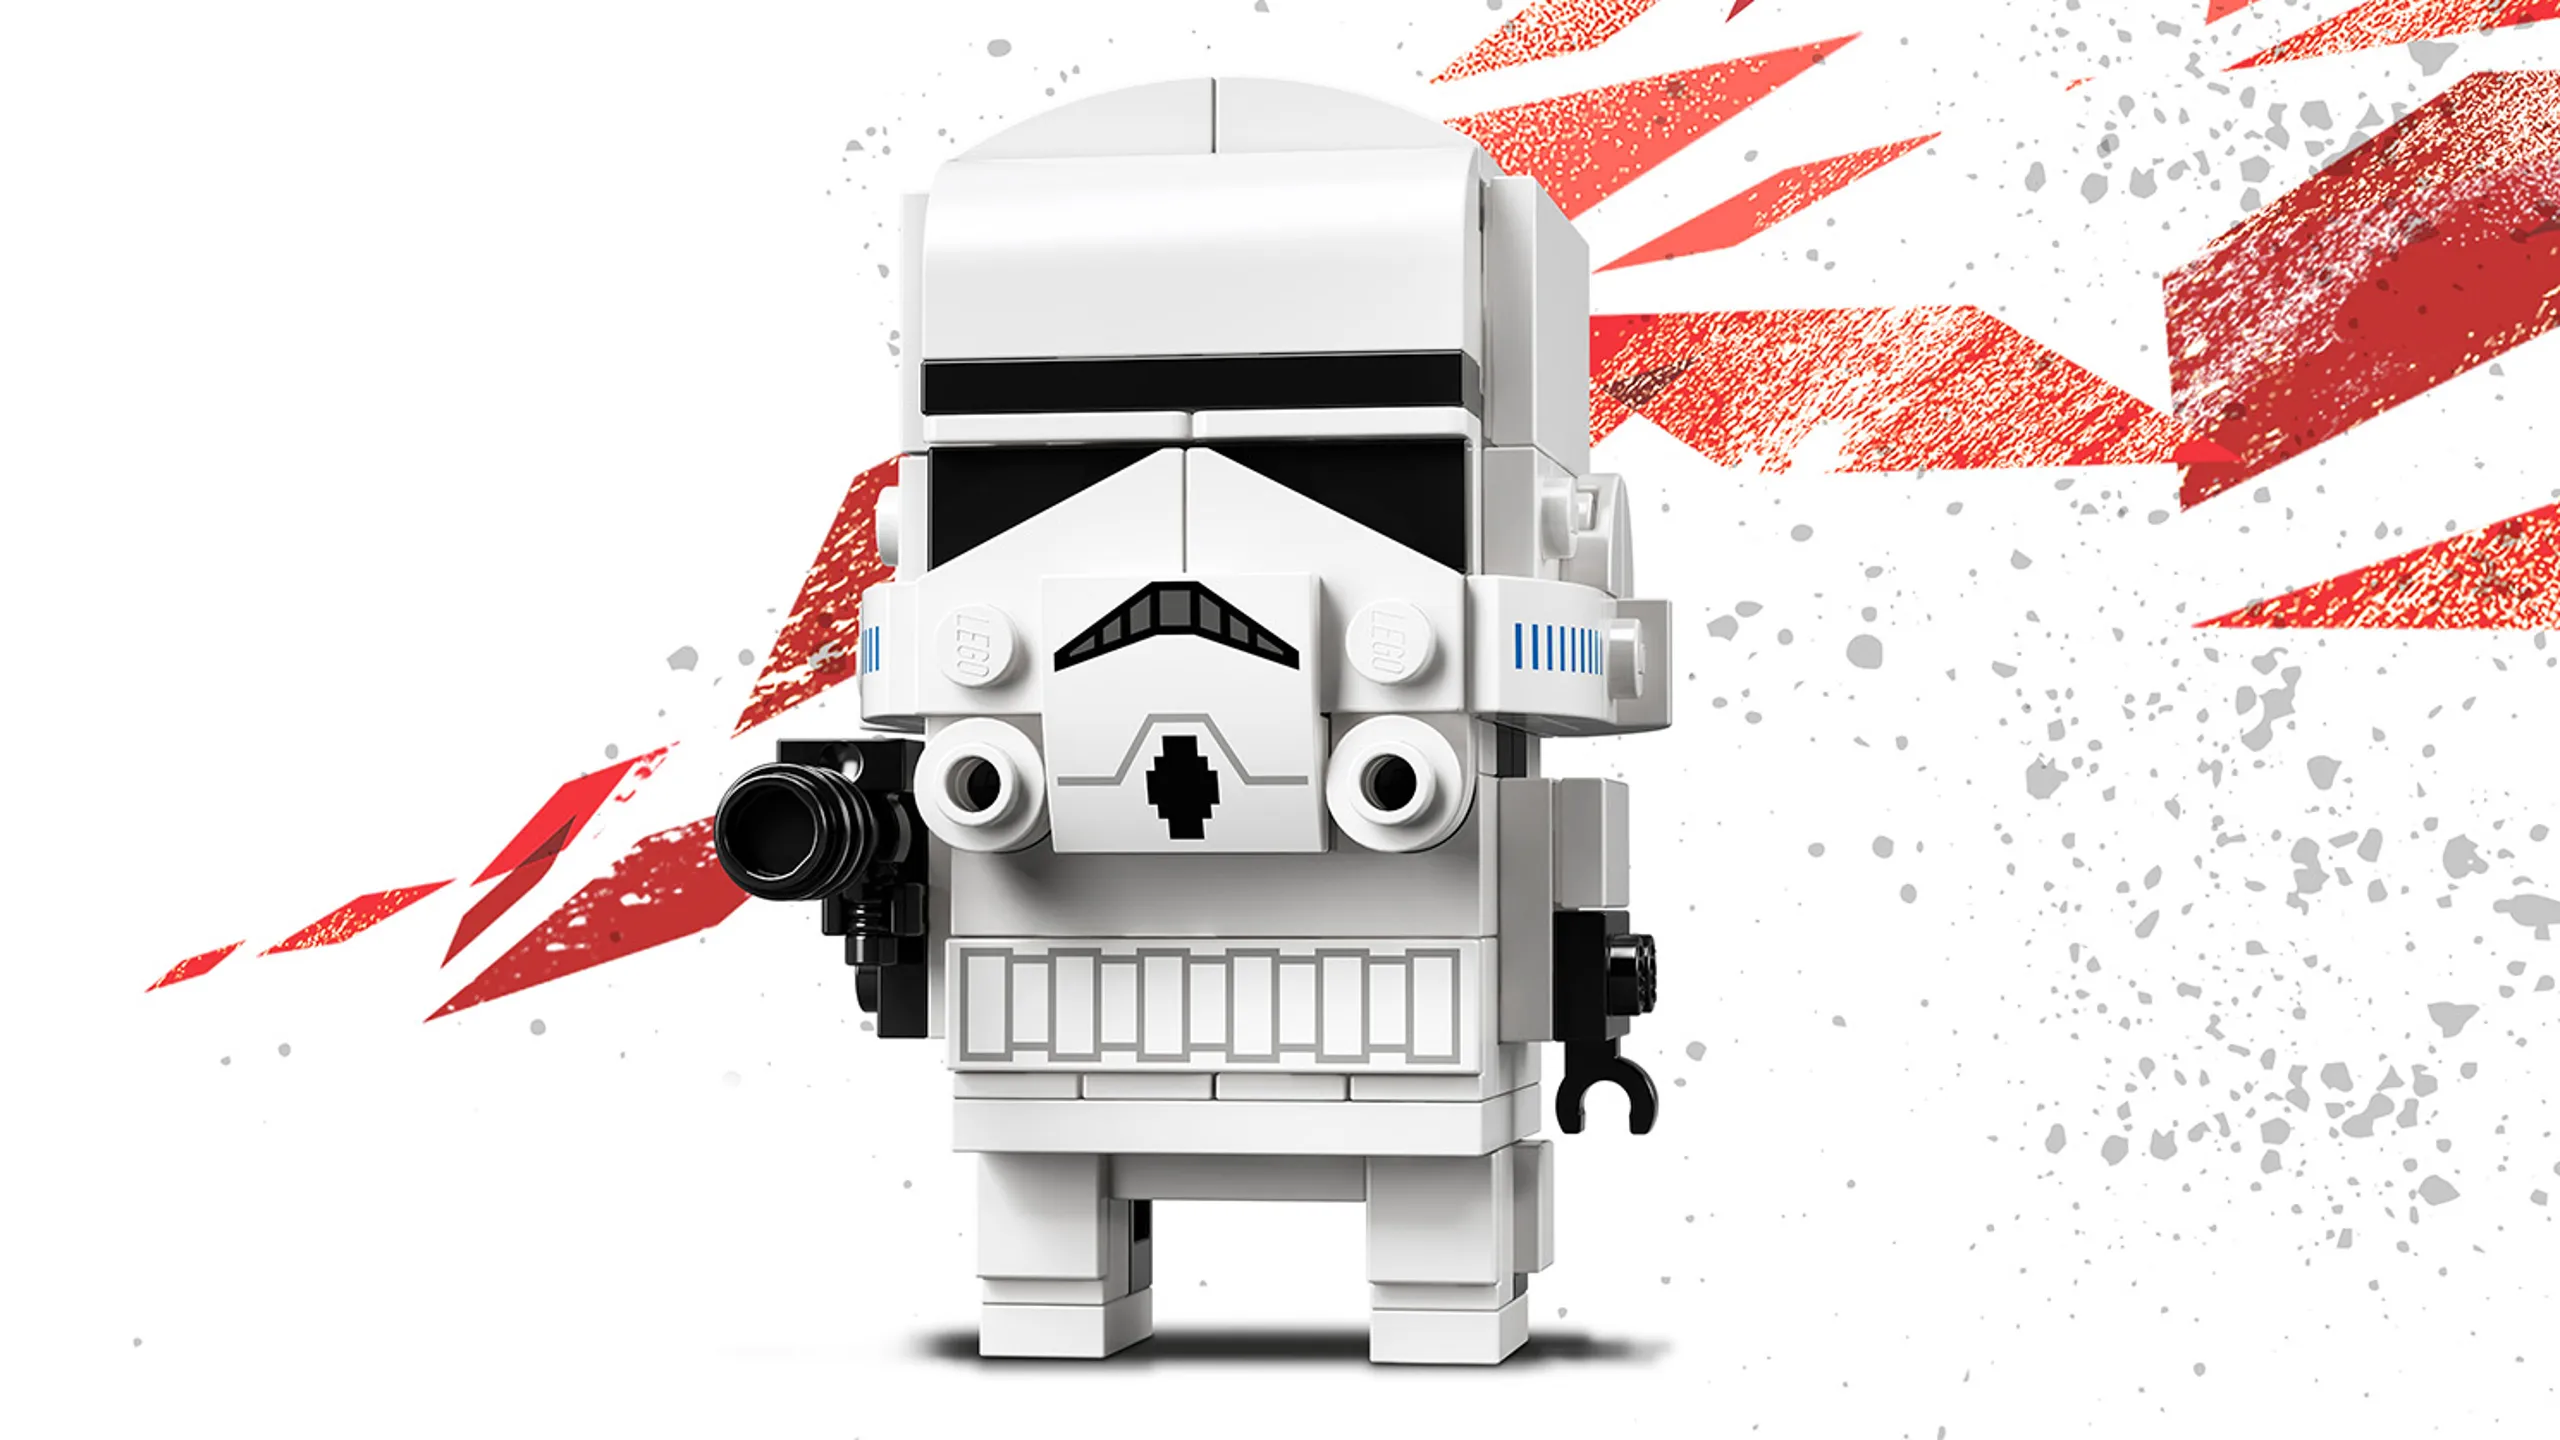 LEGO Brickheadz - 41620 Stormtrooper - Build your own Stormtrooper as the one in the movie Star Wars: Episode V The Empire Strikes Back.